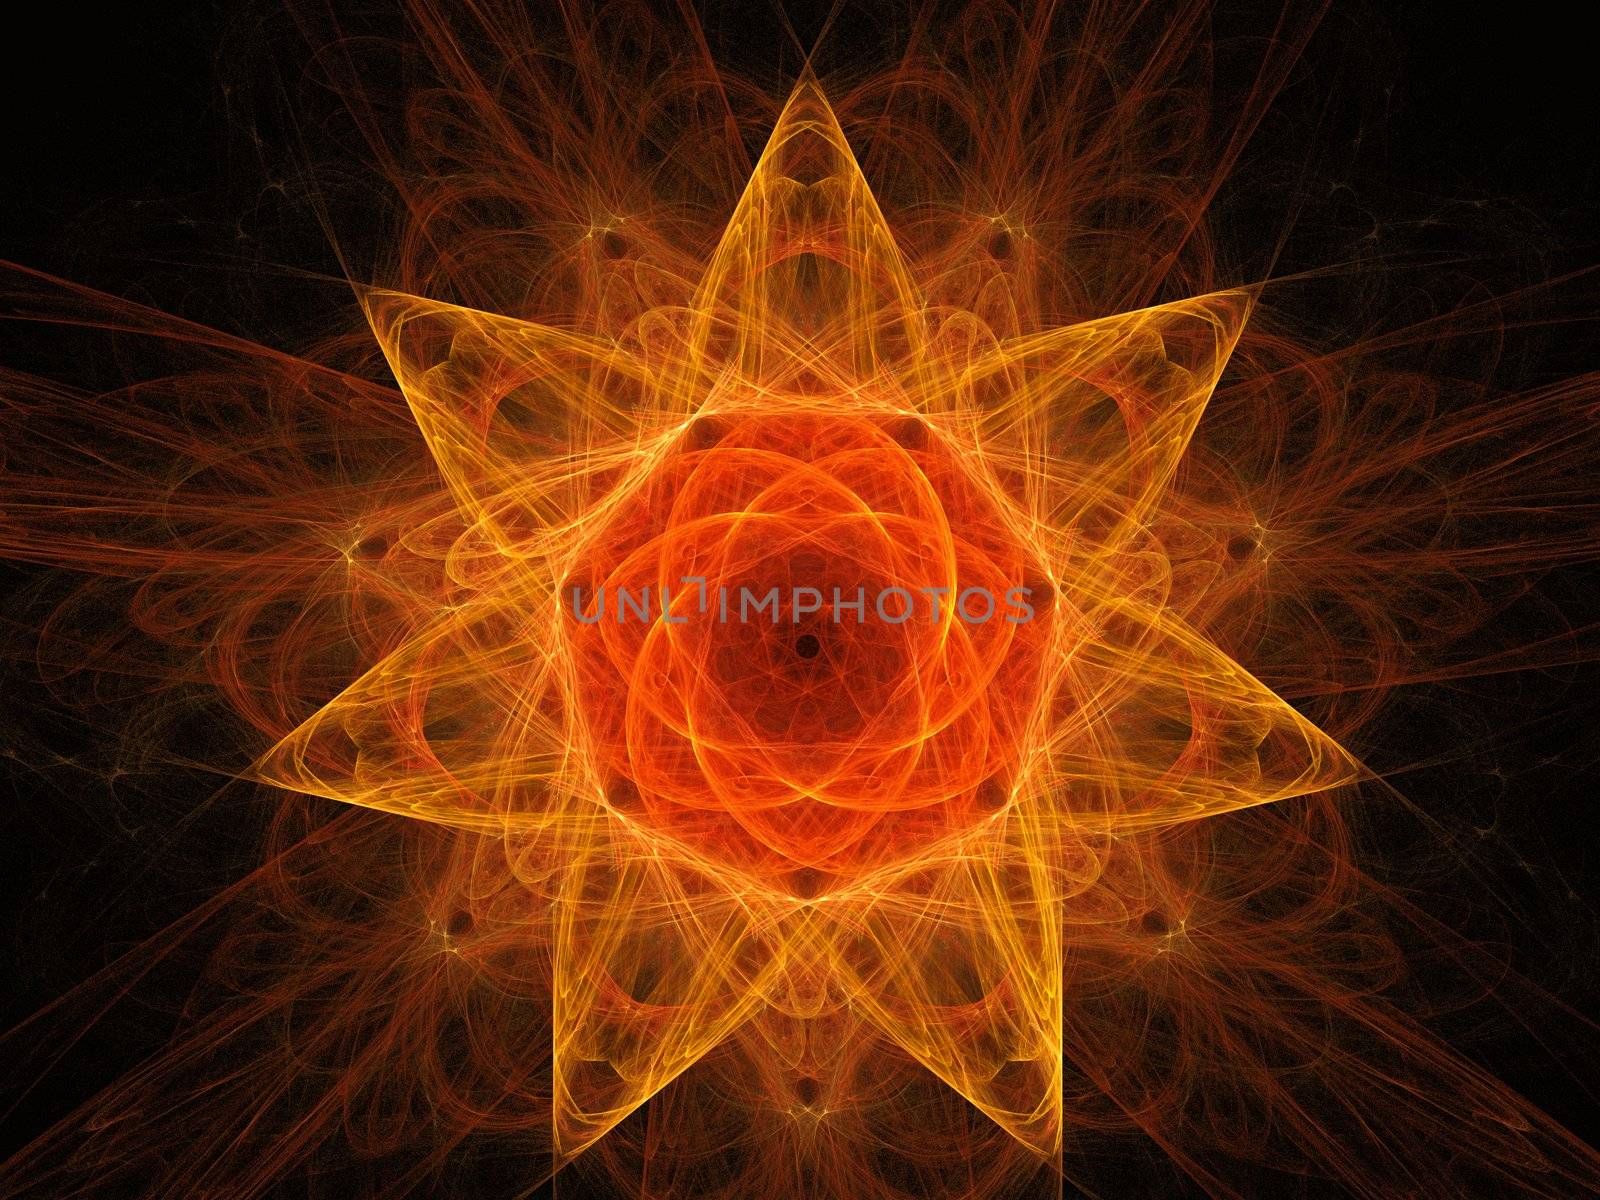 a star rendering created with fractal functions